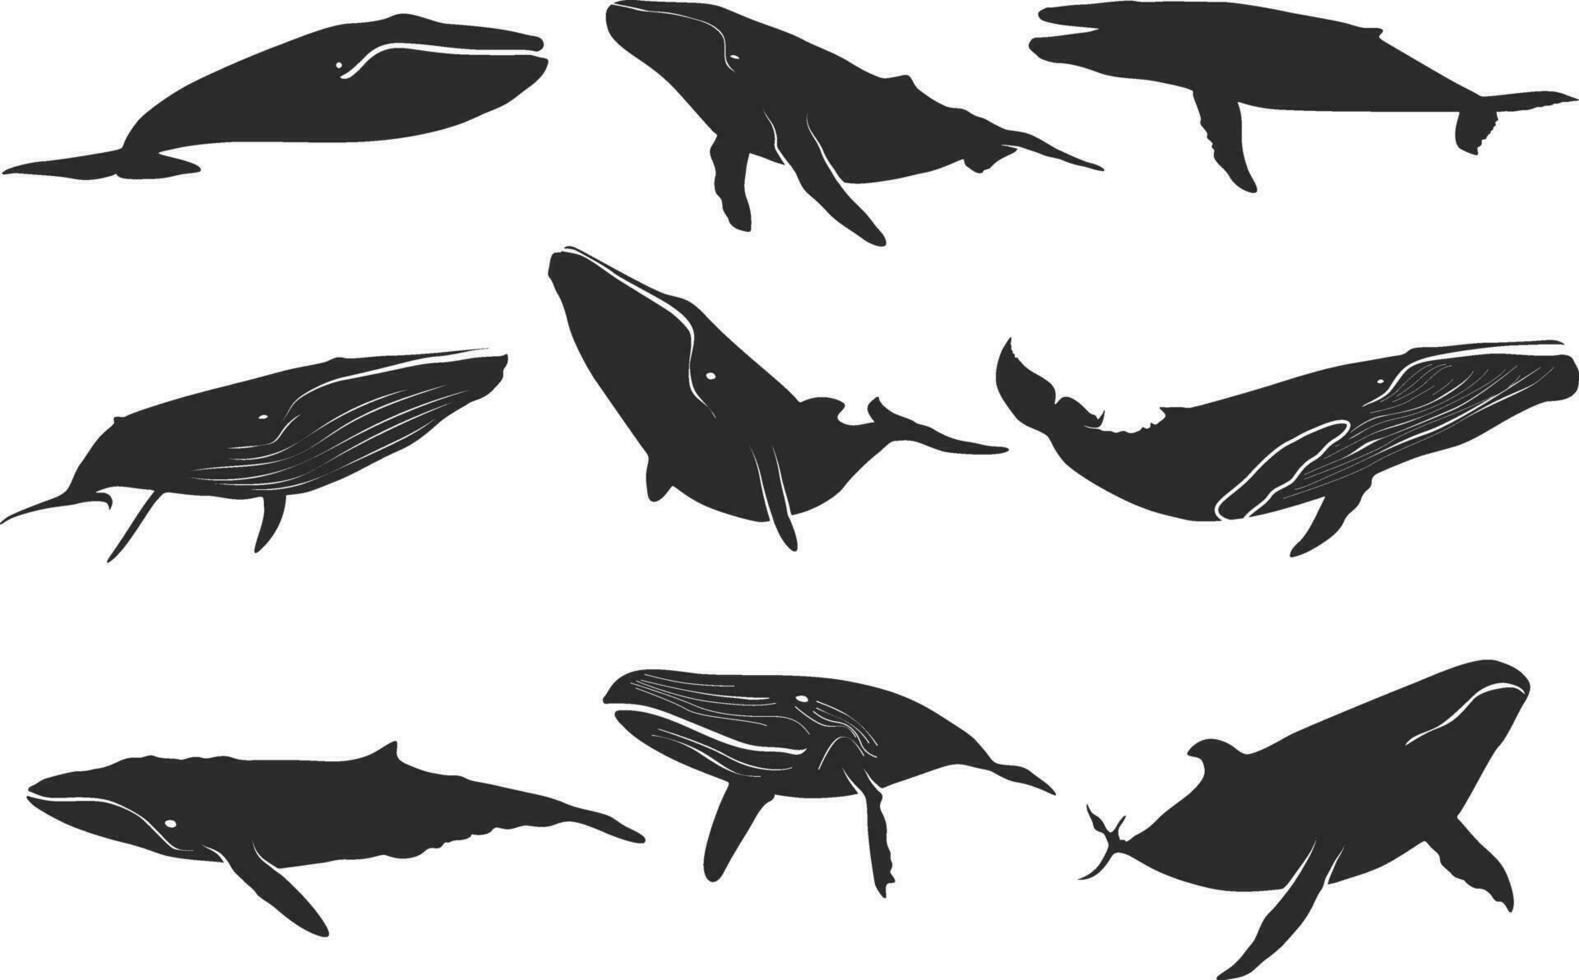 Blue whale silhouette, Whale silhouette, Blue whale icon set, Whale clipart. vector